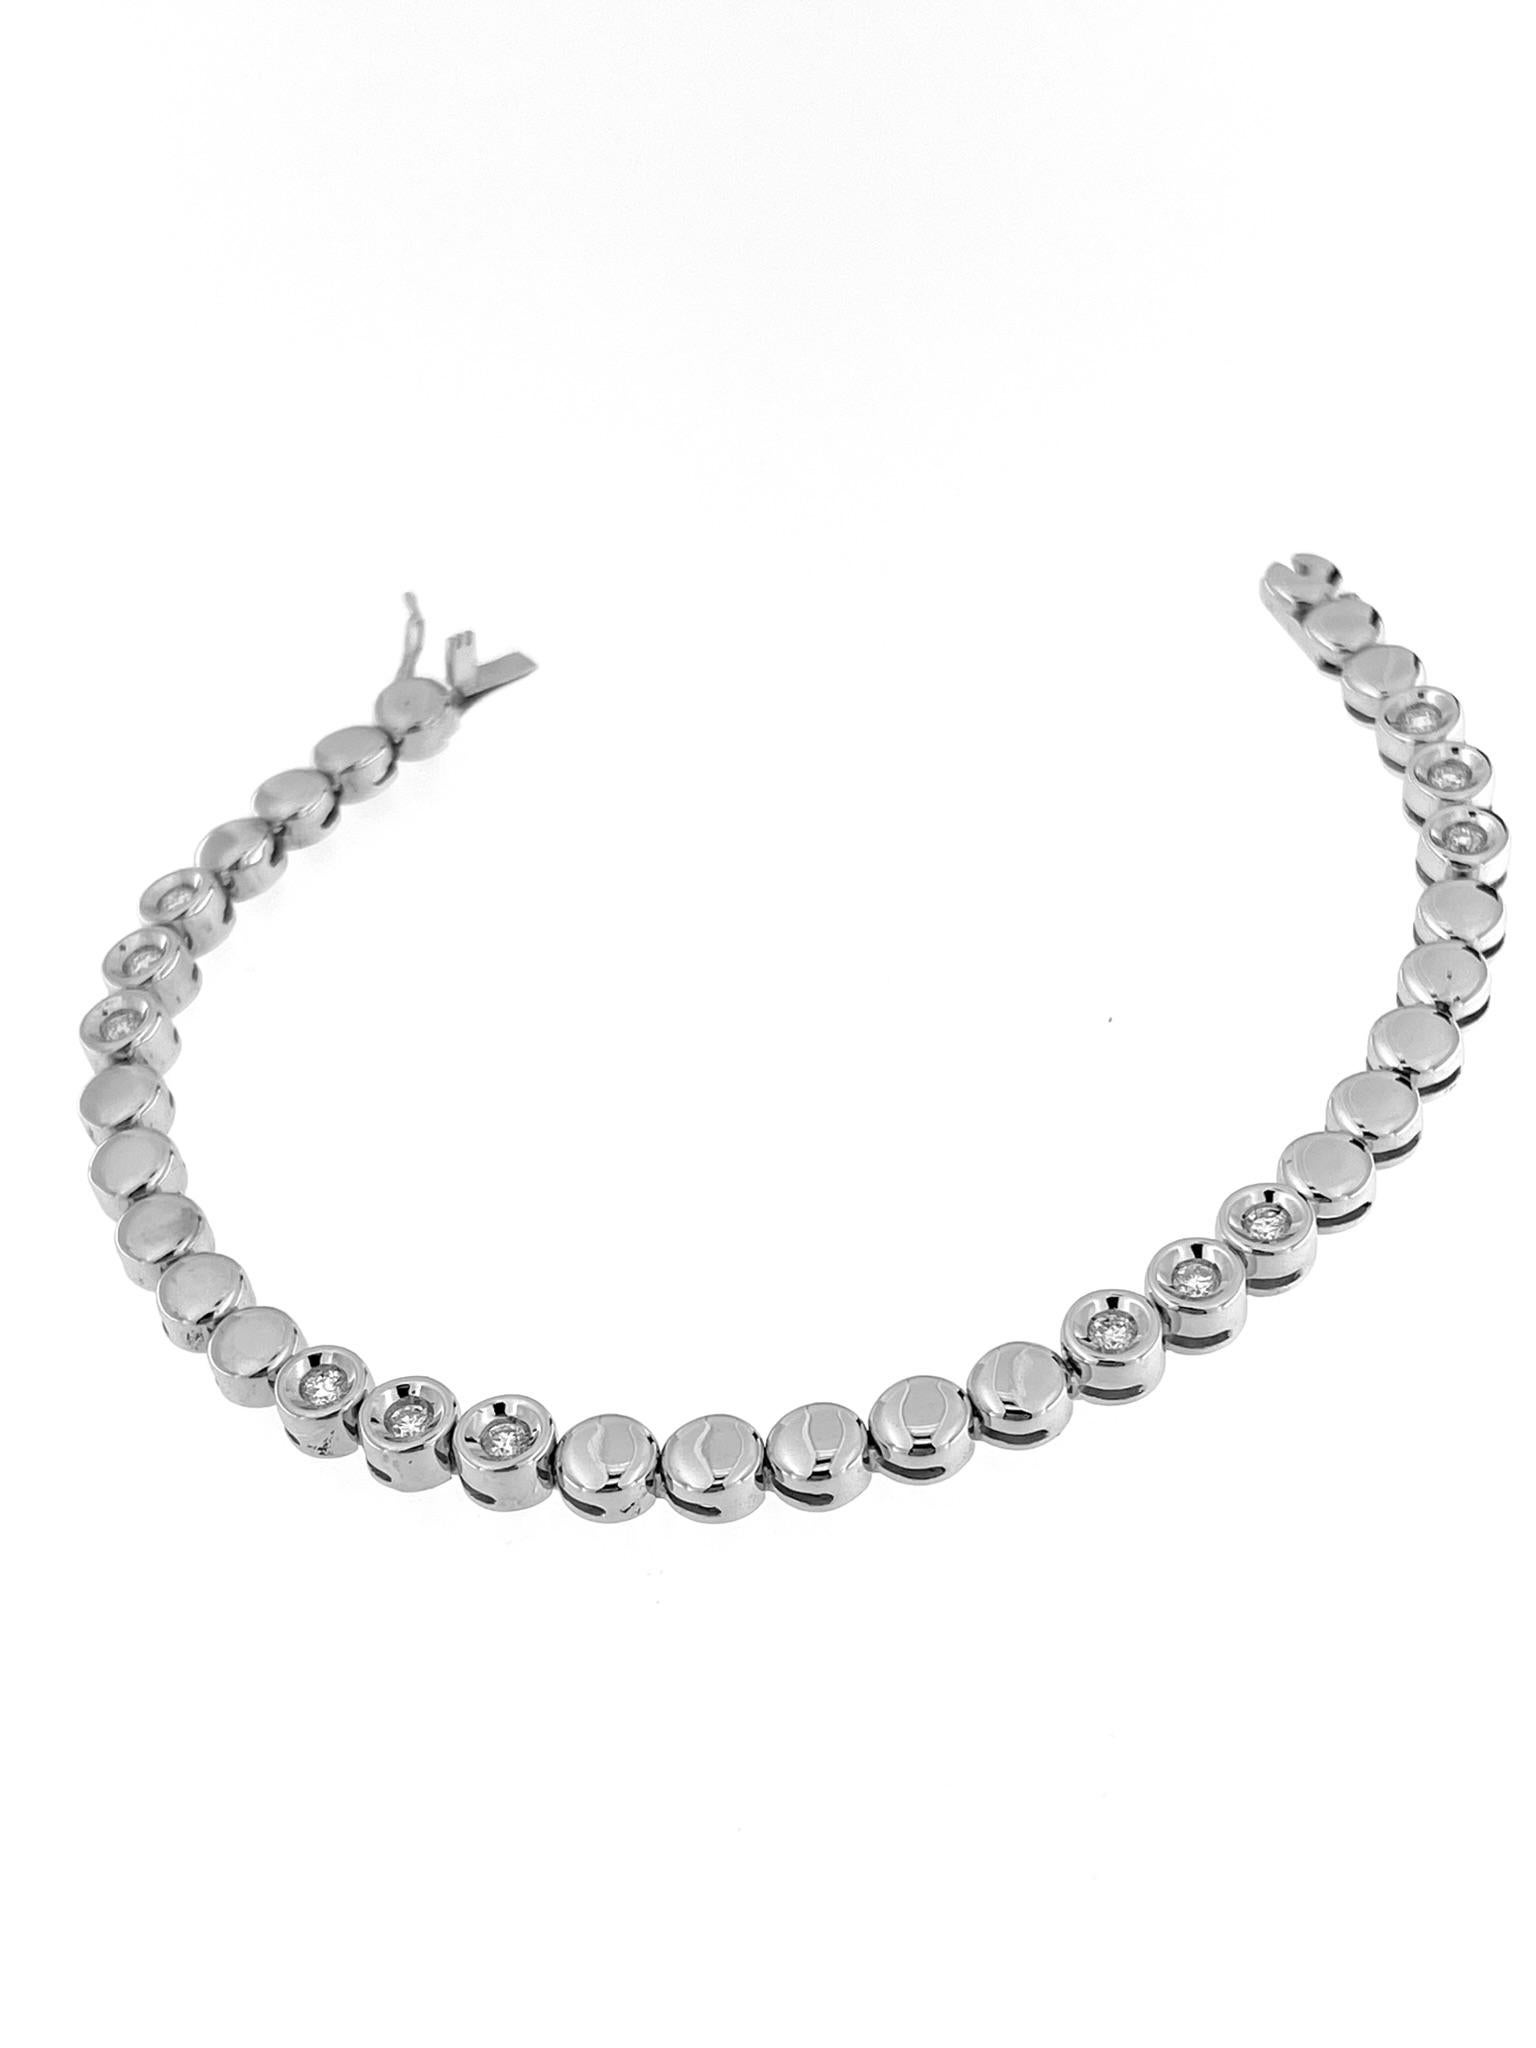 The Contemporary Tennis Bracelet in 18-karat White Gold is a stunning piece of jewelry that exemplifies modern elegance. Crafted with precision and sophistication, this bracelet features a classic tennis design, seamlessly blending style with